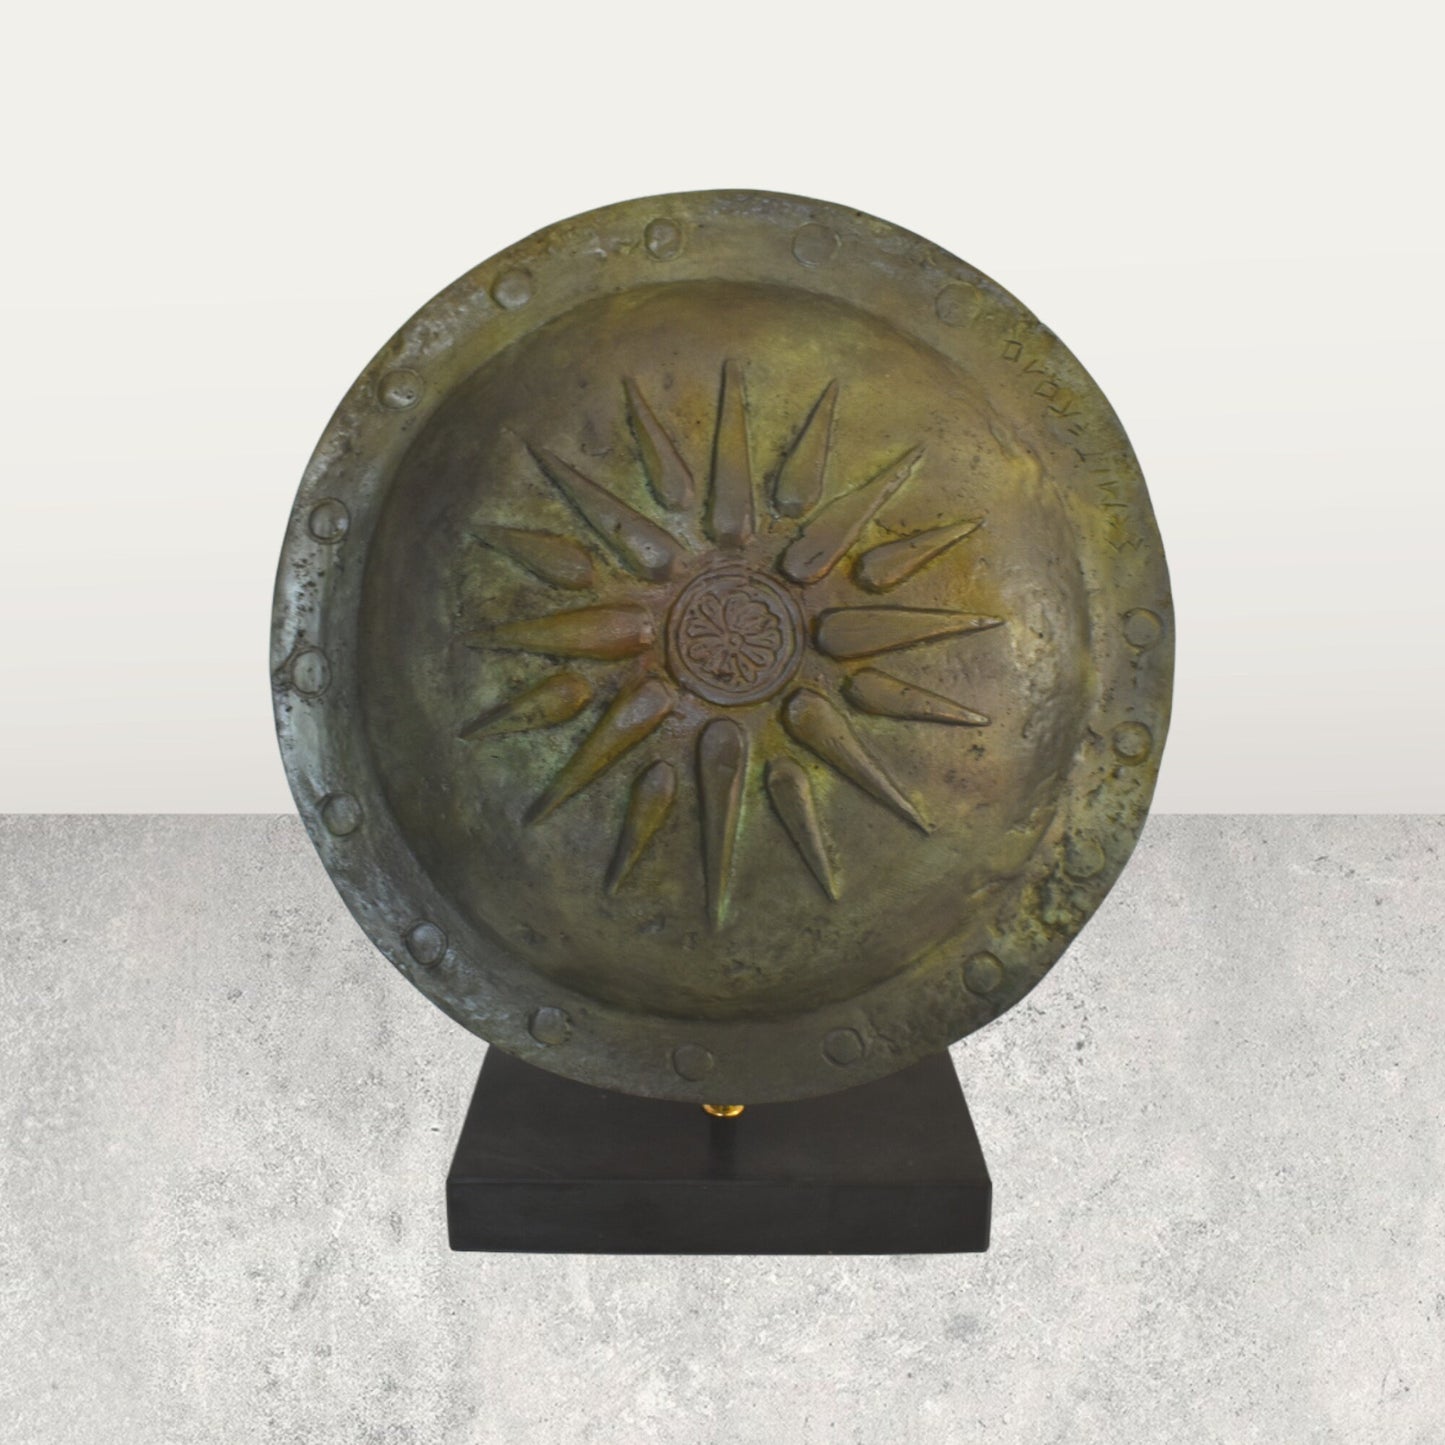 Ancient Greek Macedonian Shield - Vergina Sun - Represents the totality of all four elements, Water, Earth, Fire, and Air - Bronze